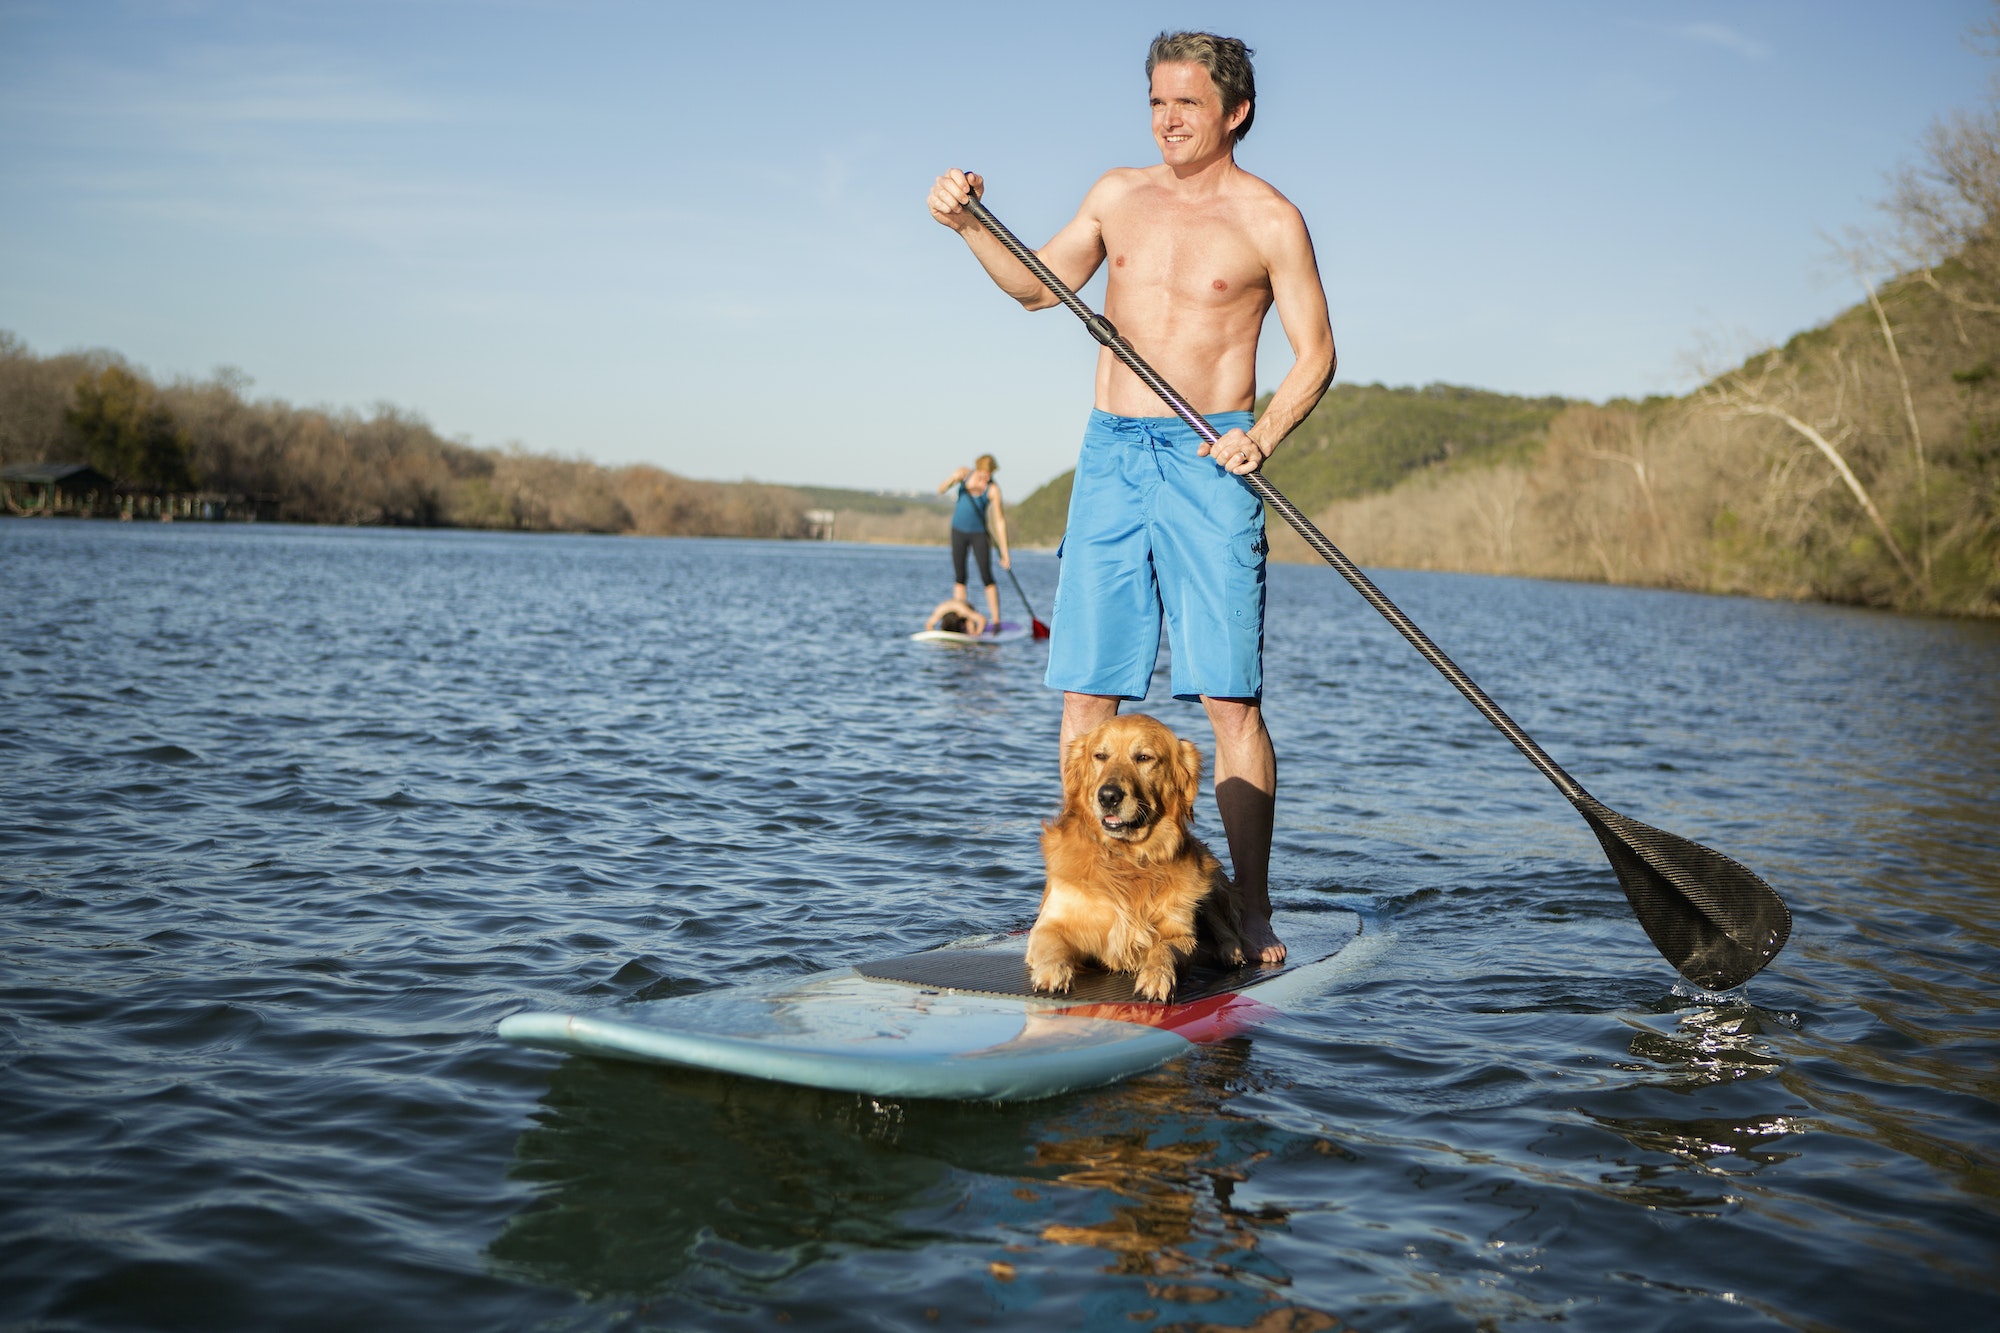 A man standing on a paddleboard with a dog.